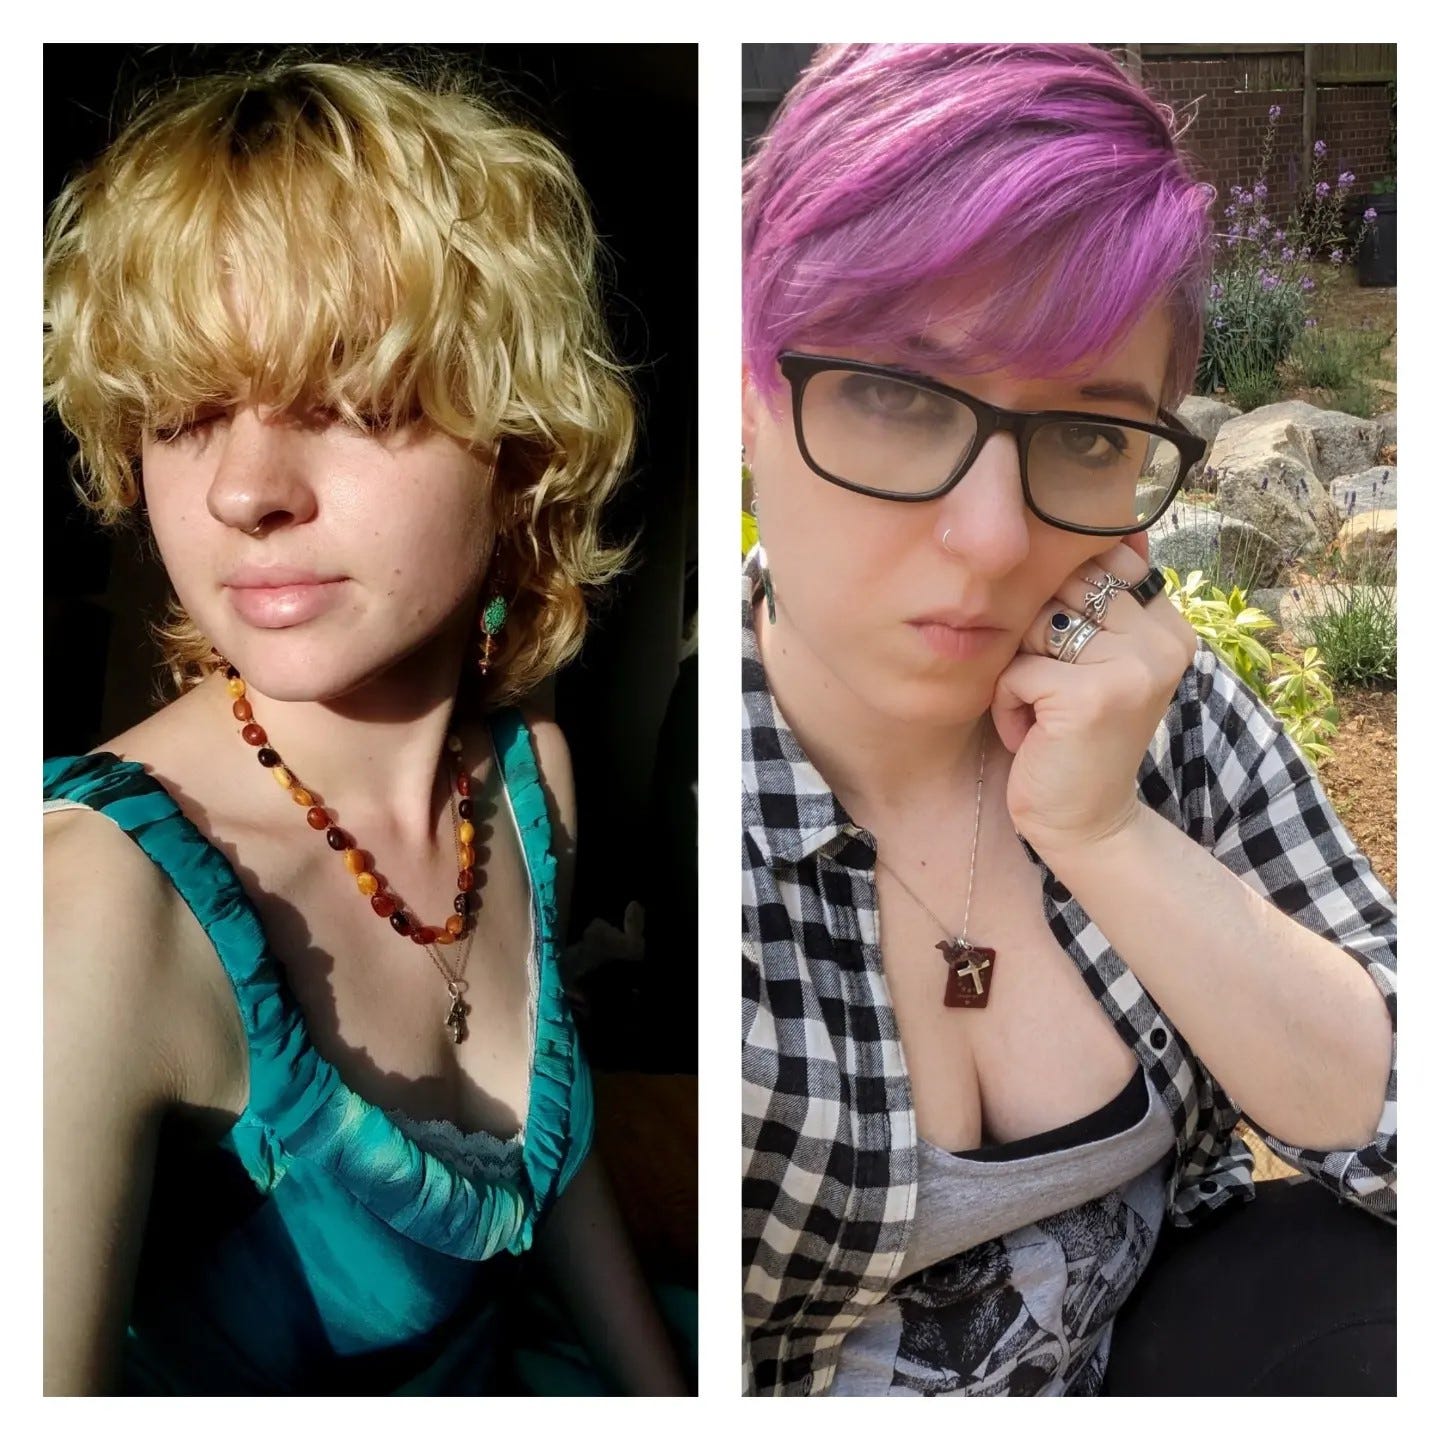 To the left, a photo of a white femme non-binary person with blond wavy hair and a green silky vest top; to the right, a white woman with pink hair and glasses, in a black and white flannel shirt and grey vest top.